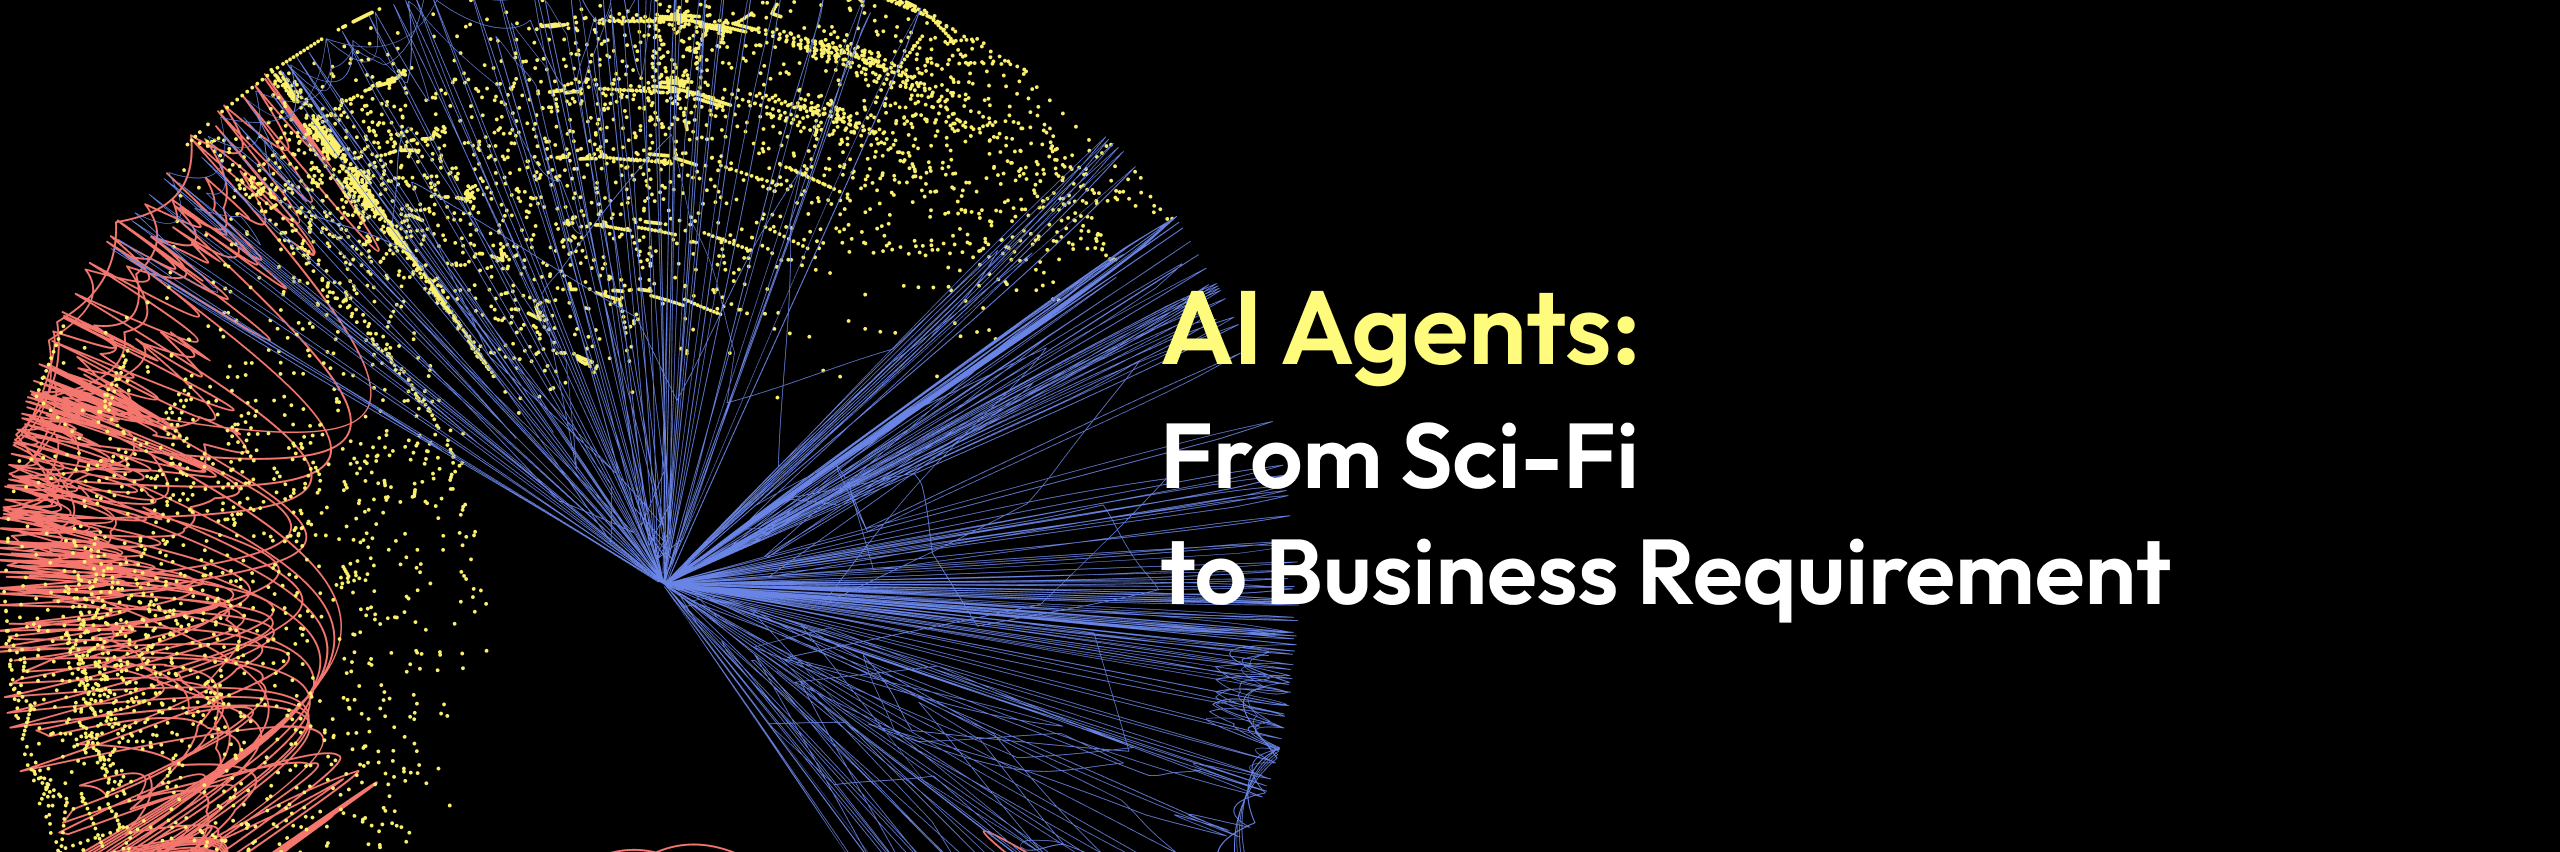 AI Agents: From Sci-Fi to Business Requirement